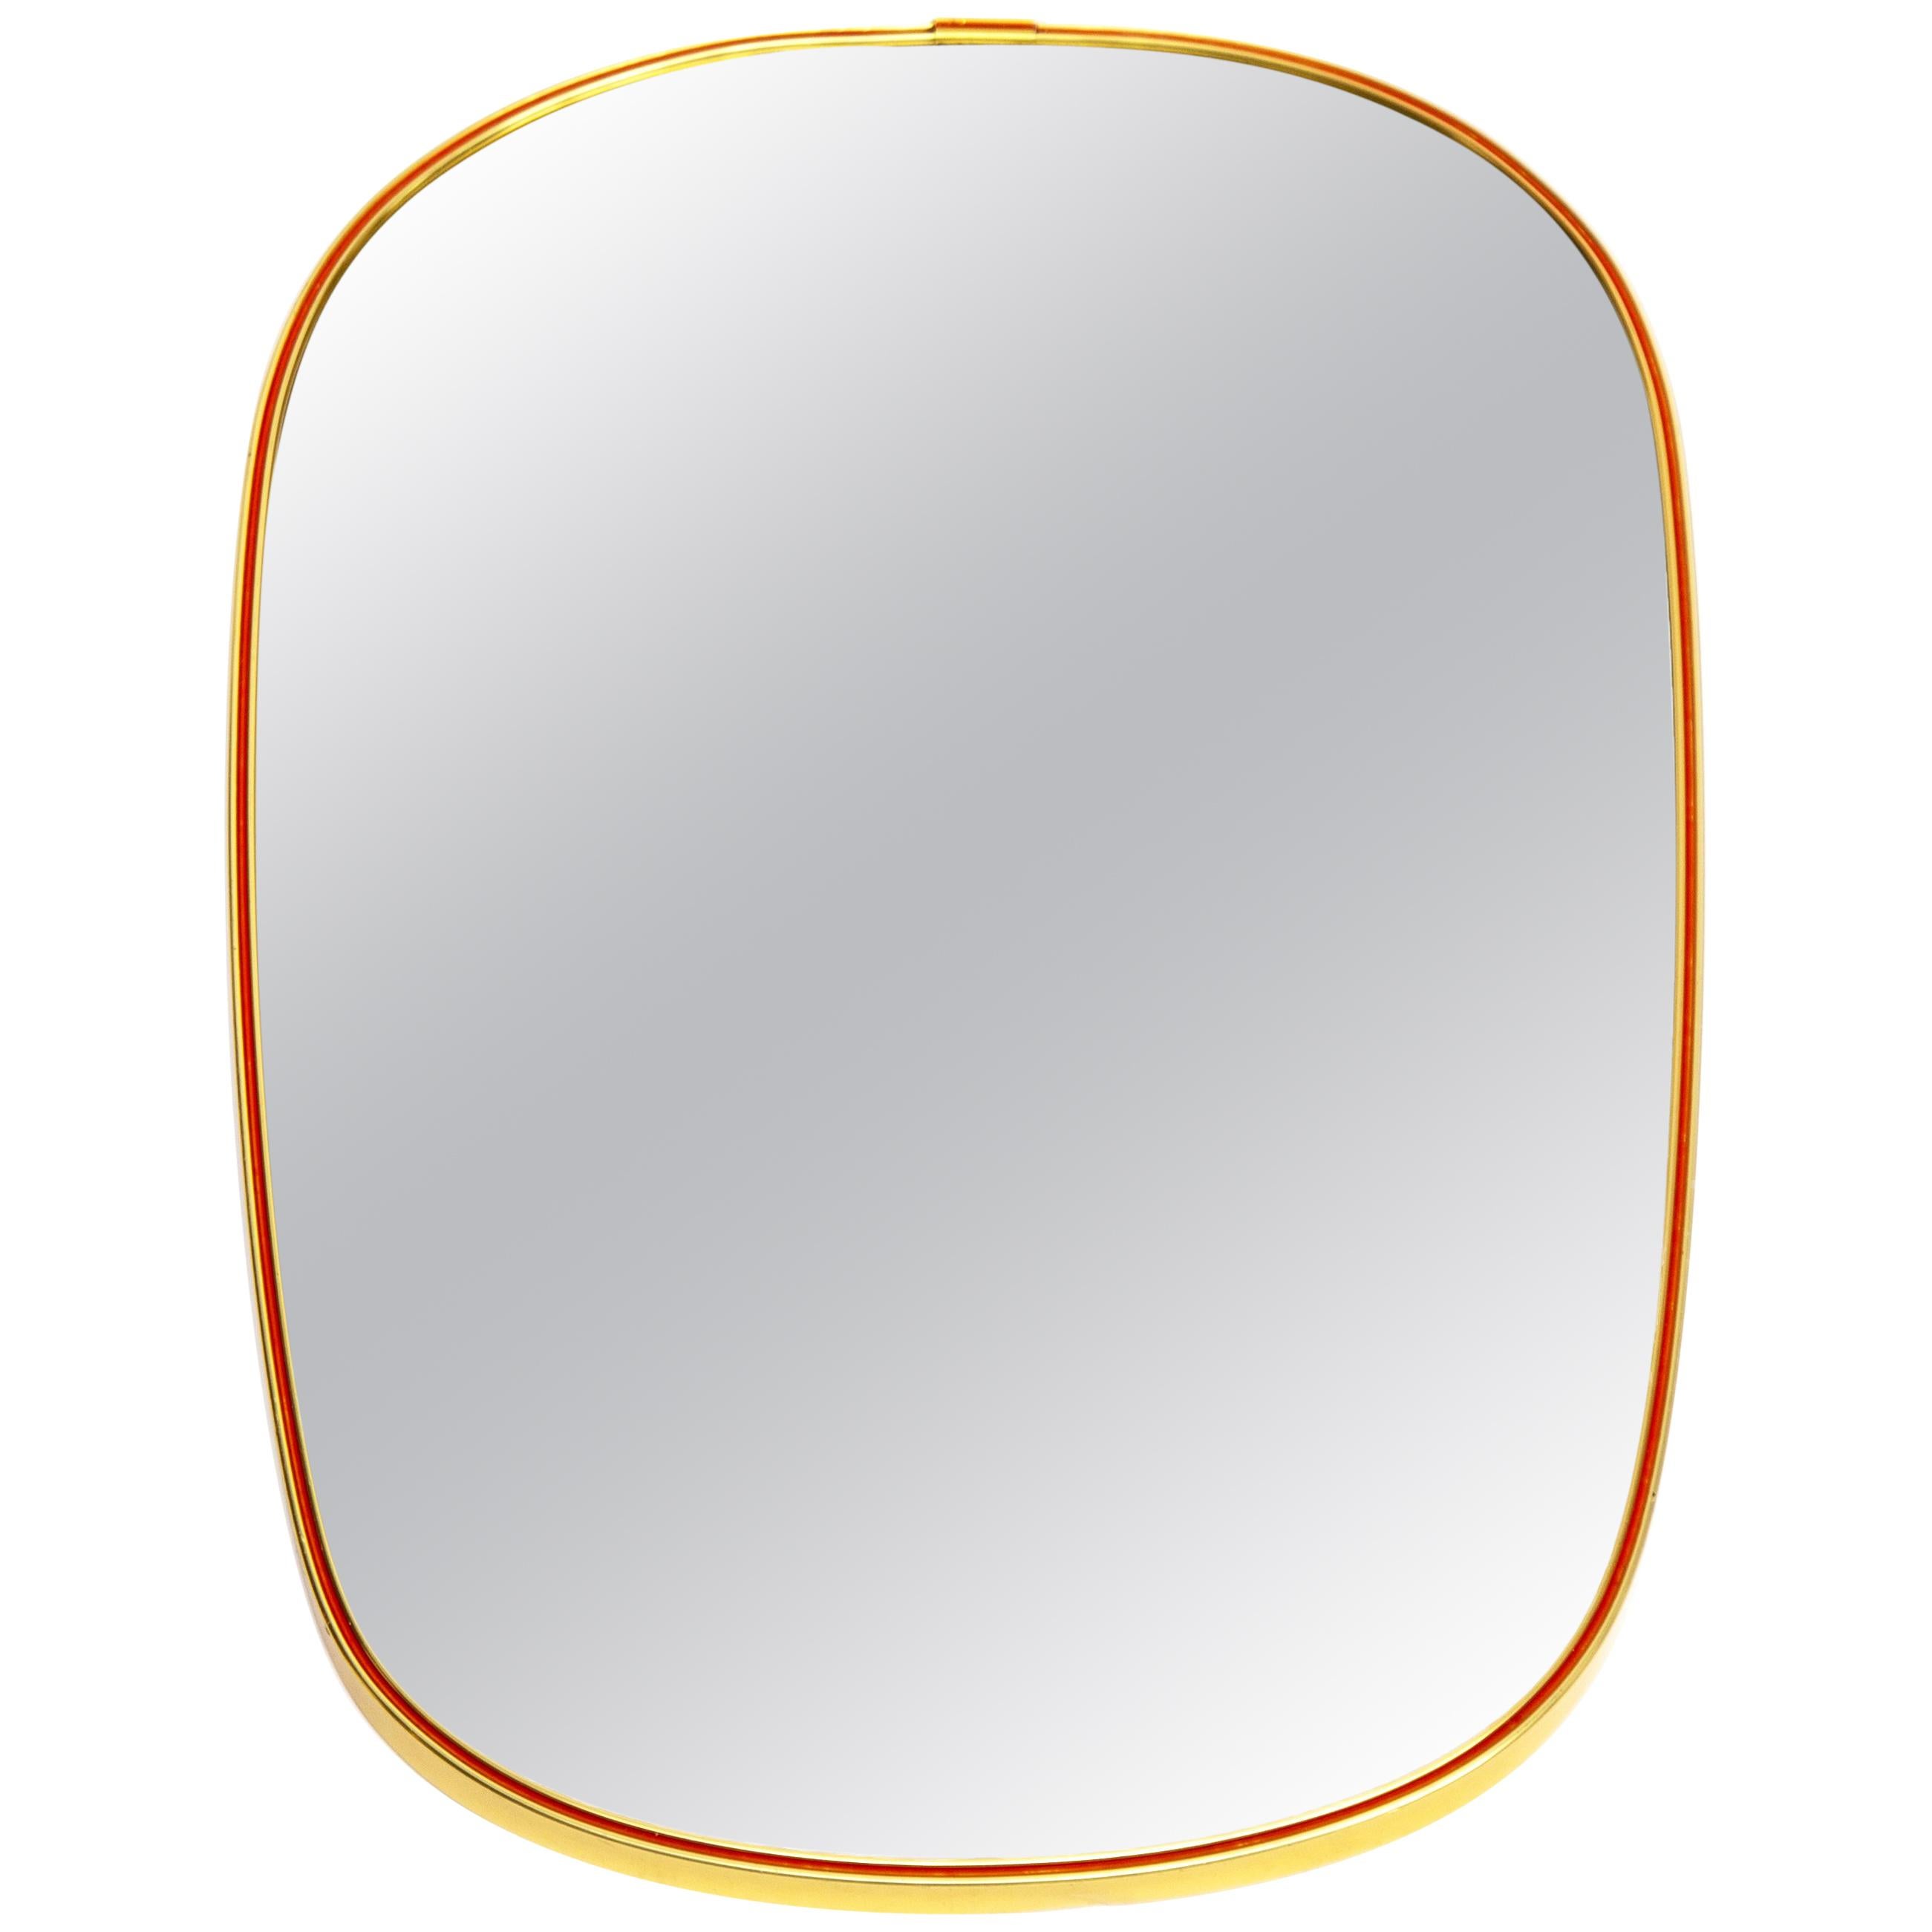 Midcentury Oval Shaped Brass Mirror, 1950s